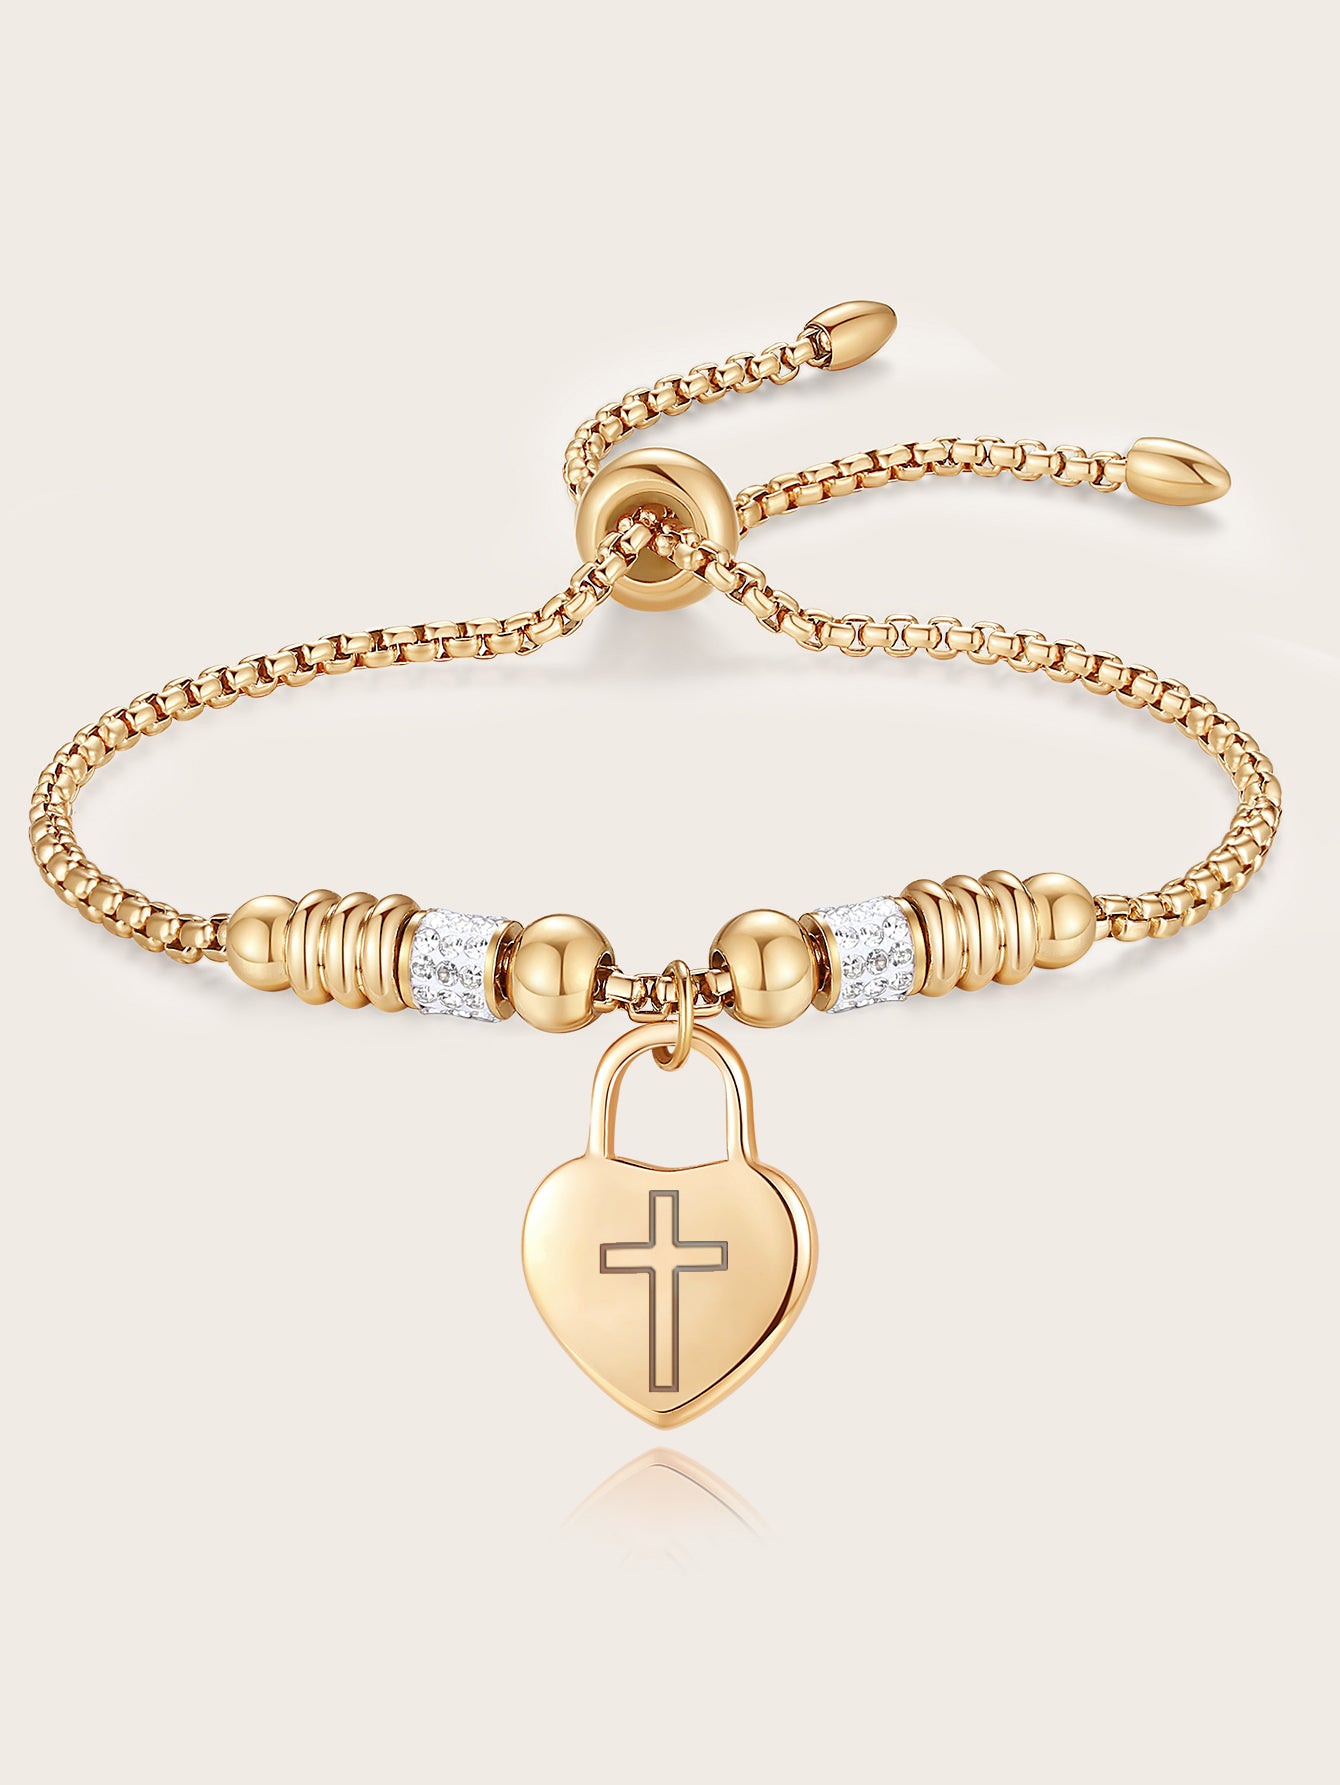 Exquisite Stainless Steel Heart Cross Bracelet - A Thoughtful Religious Gift for Women, Ideal for Christmas and New Year's Celebrations